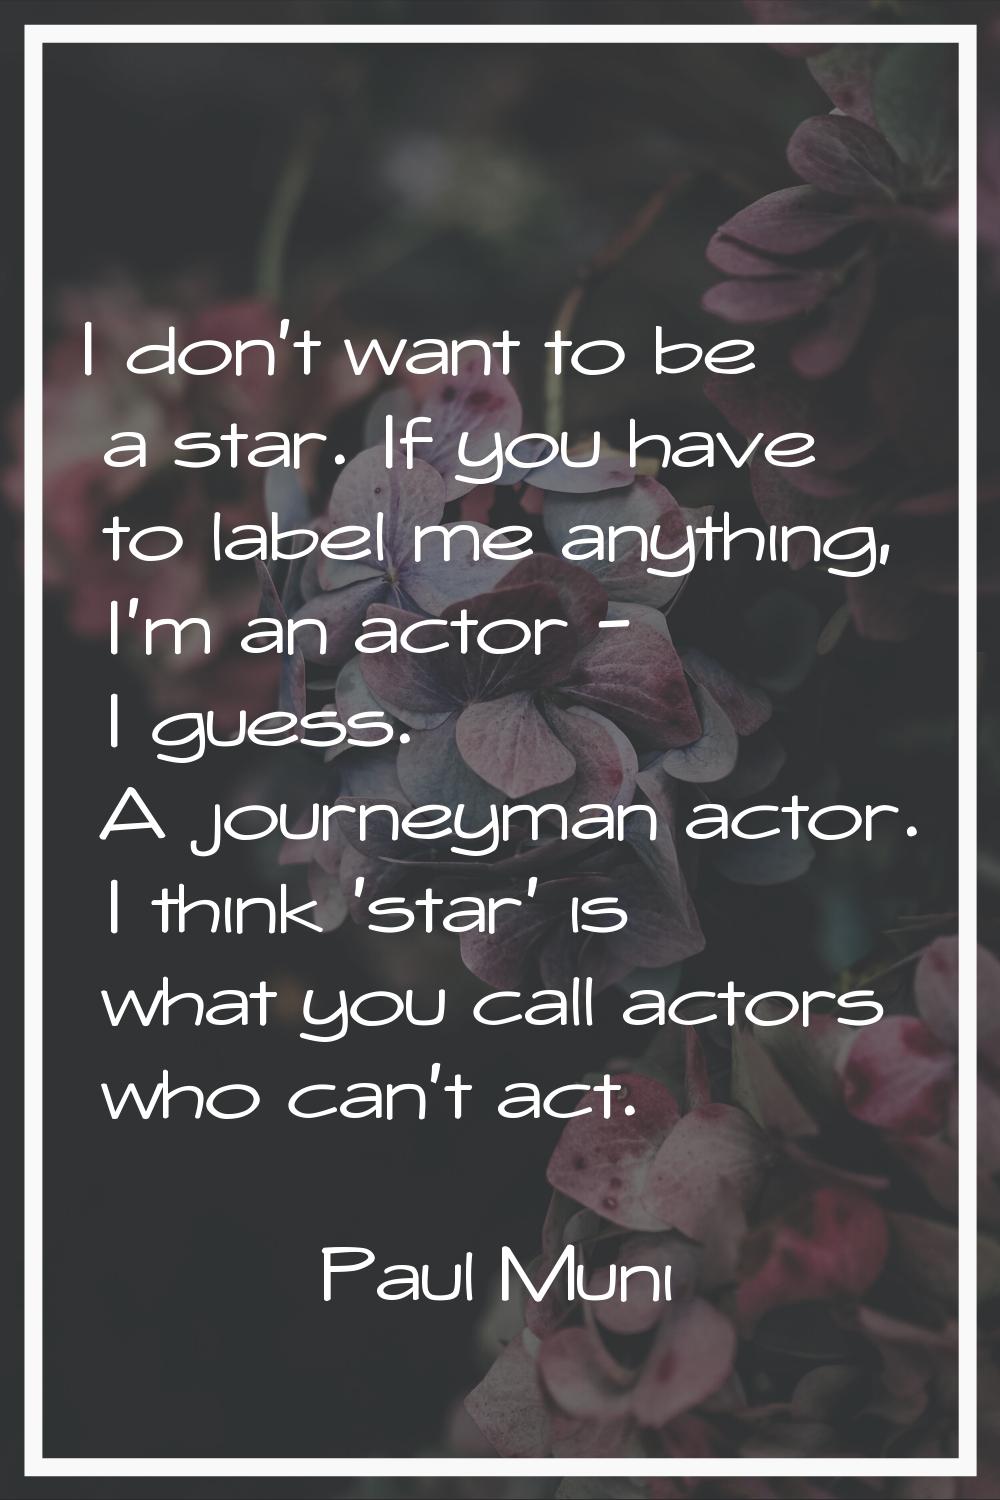 I don't want to be a star. If you have to label me anything, I'm an actor - I guess. A journeyman a